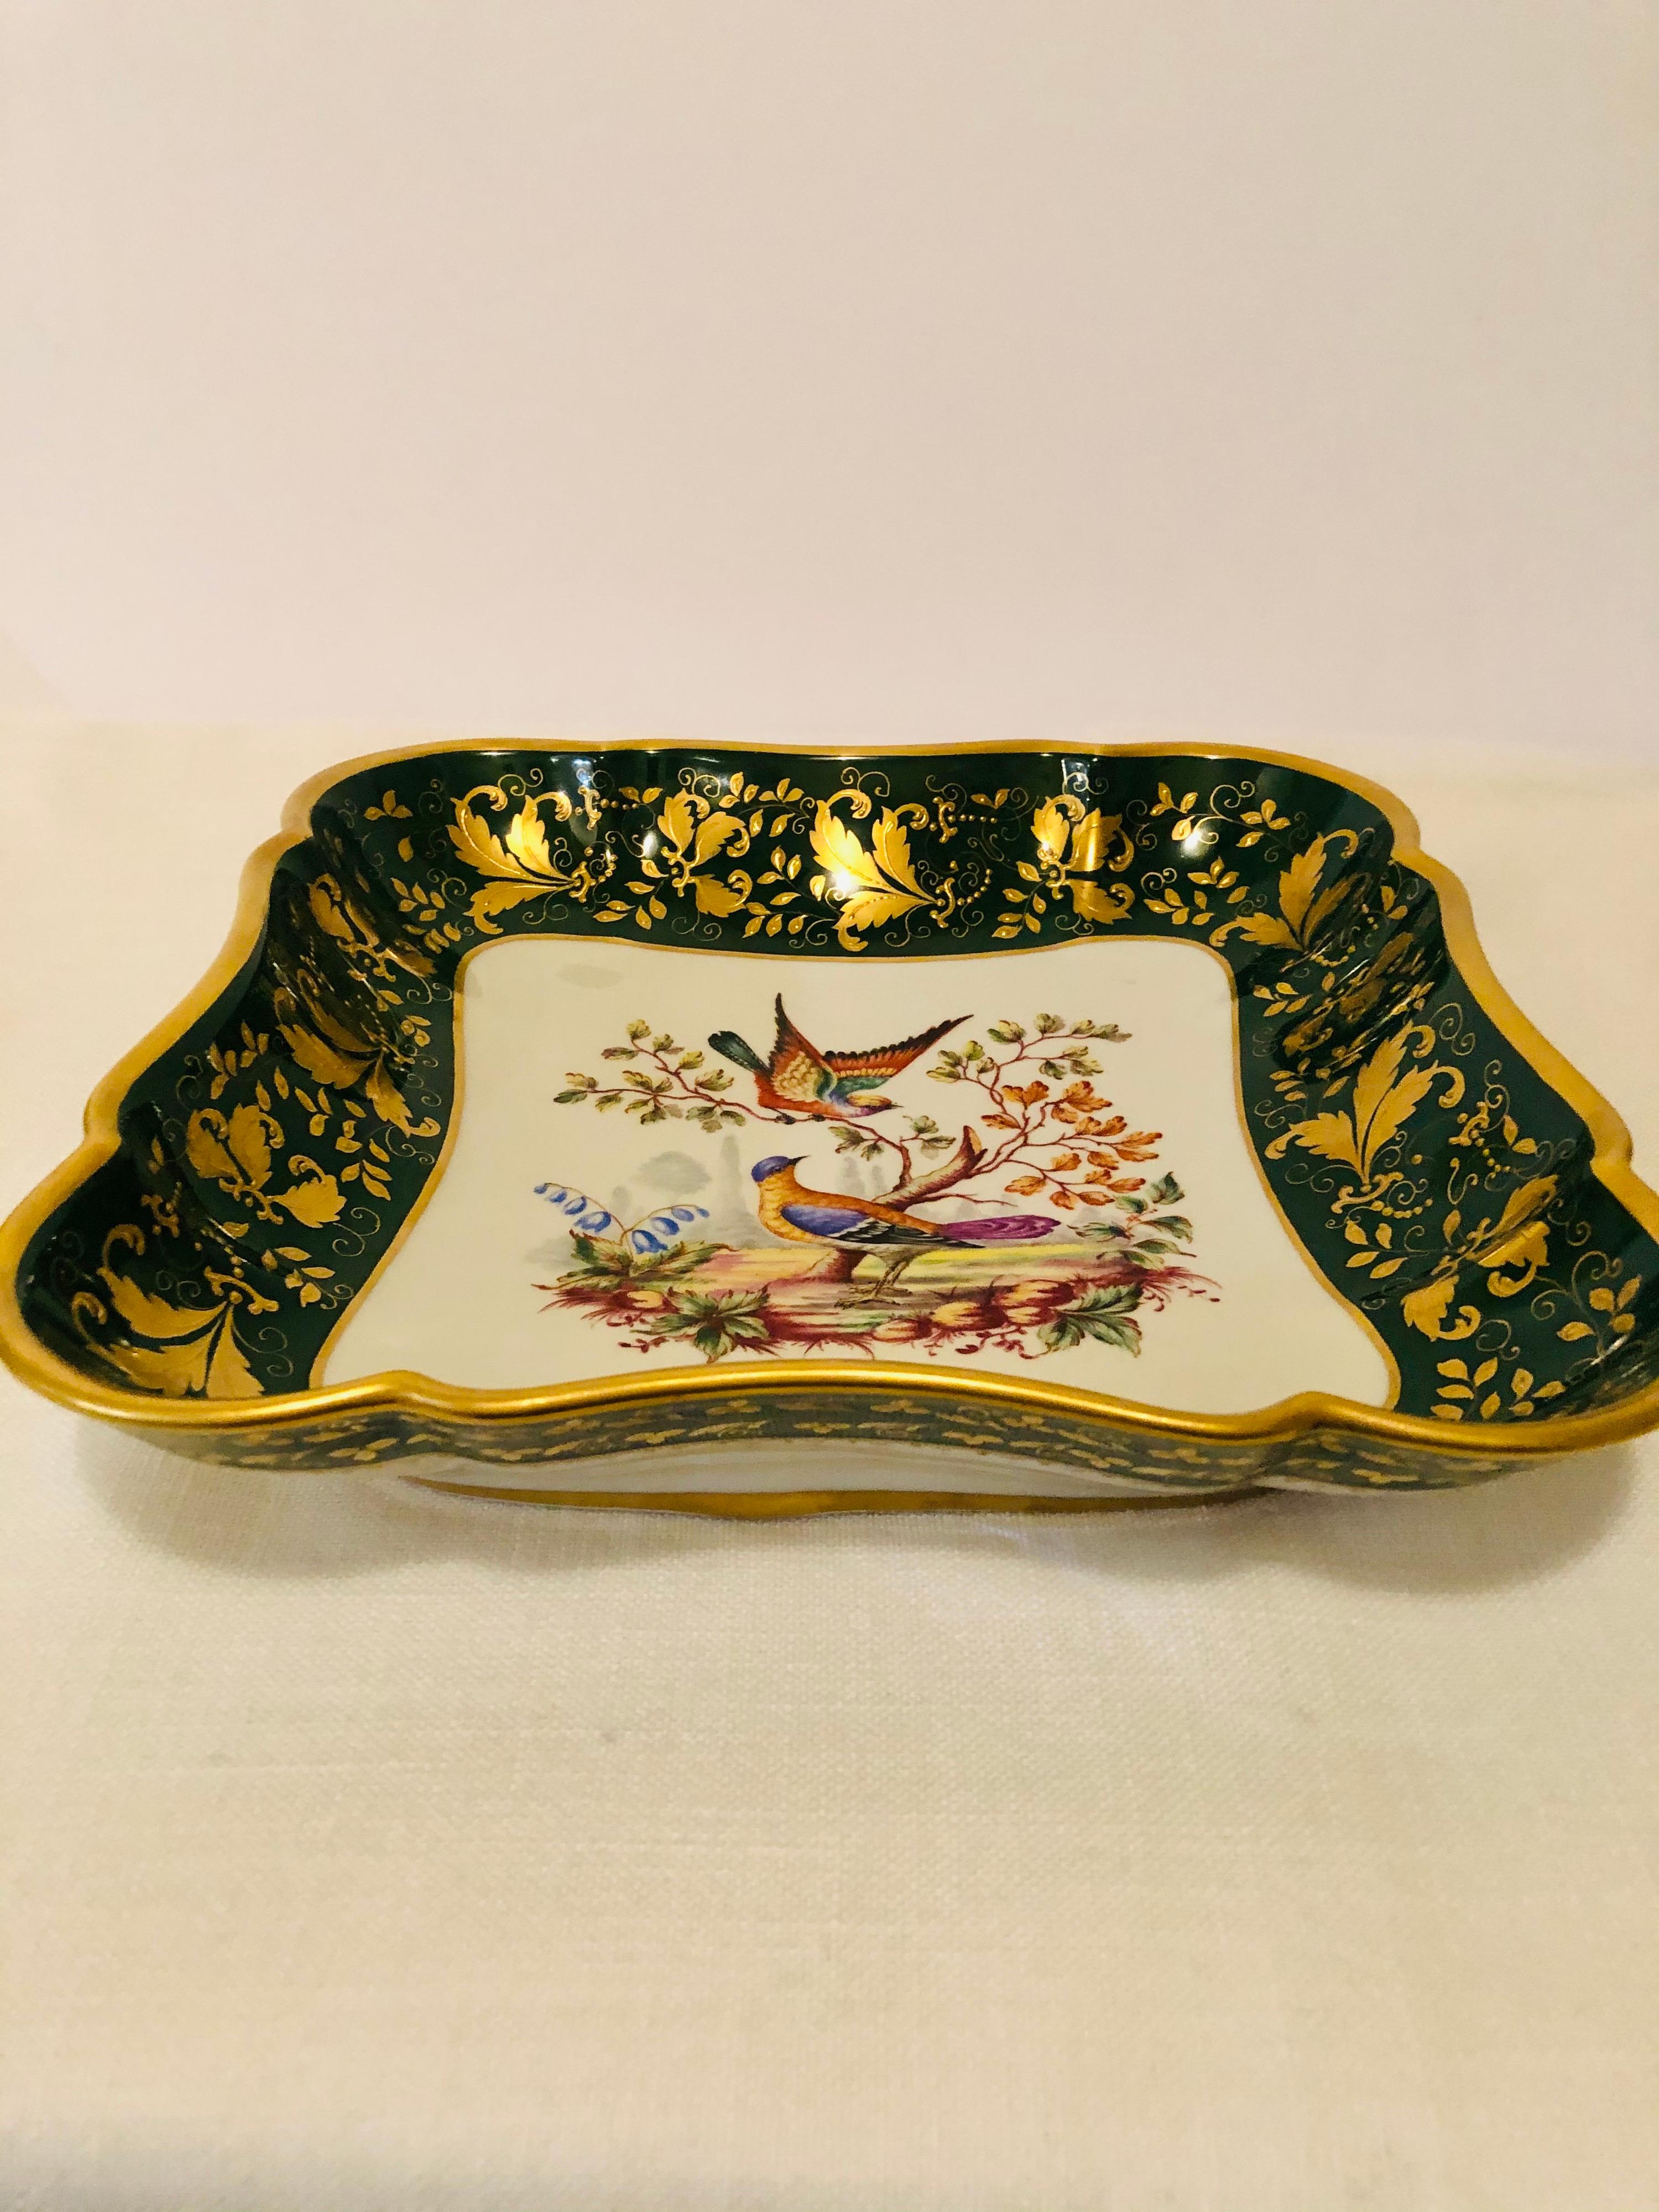 Le Tallec Green Bowl Painted with Colorful Birds with a Raised Gold Border 4